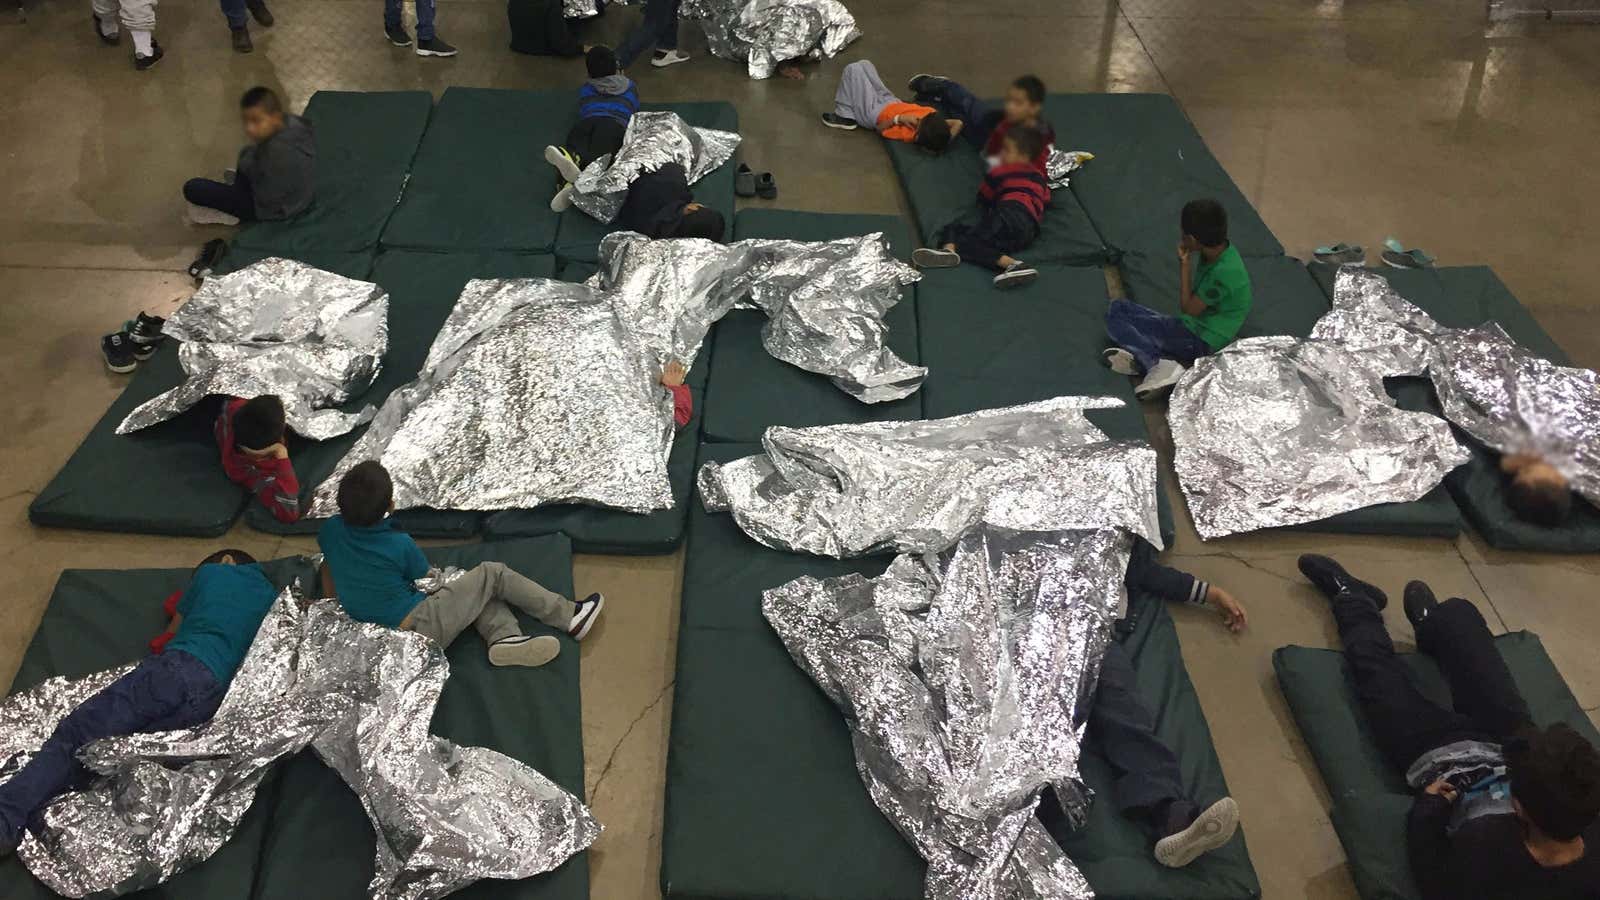 Now Trump says he wants these children with their parents.